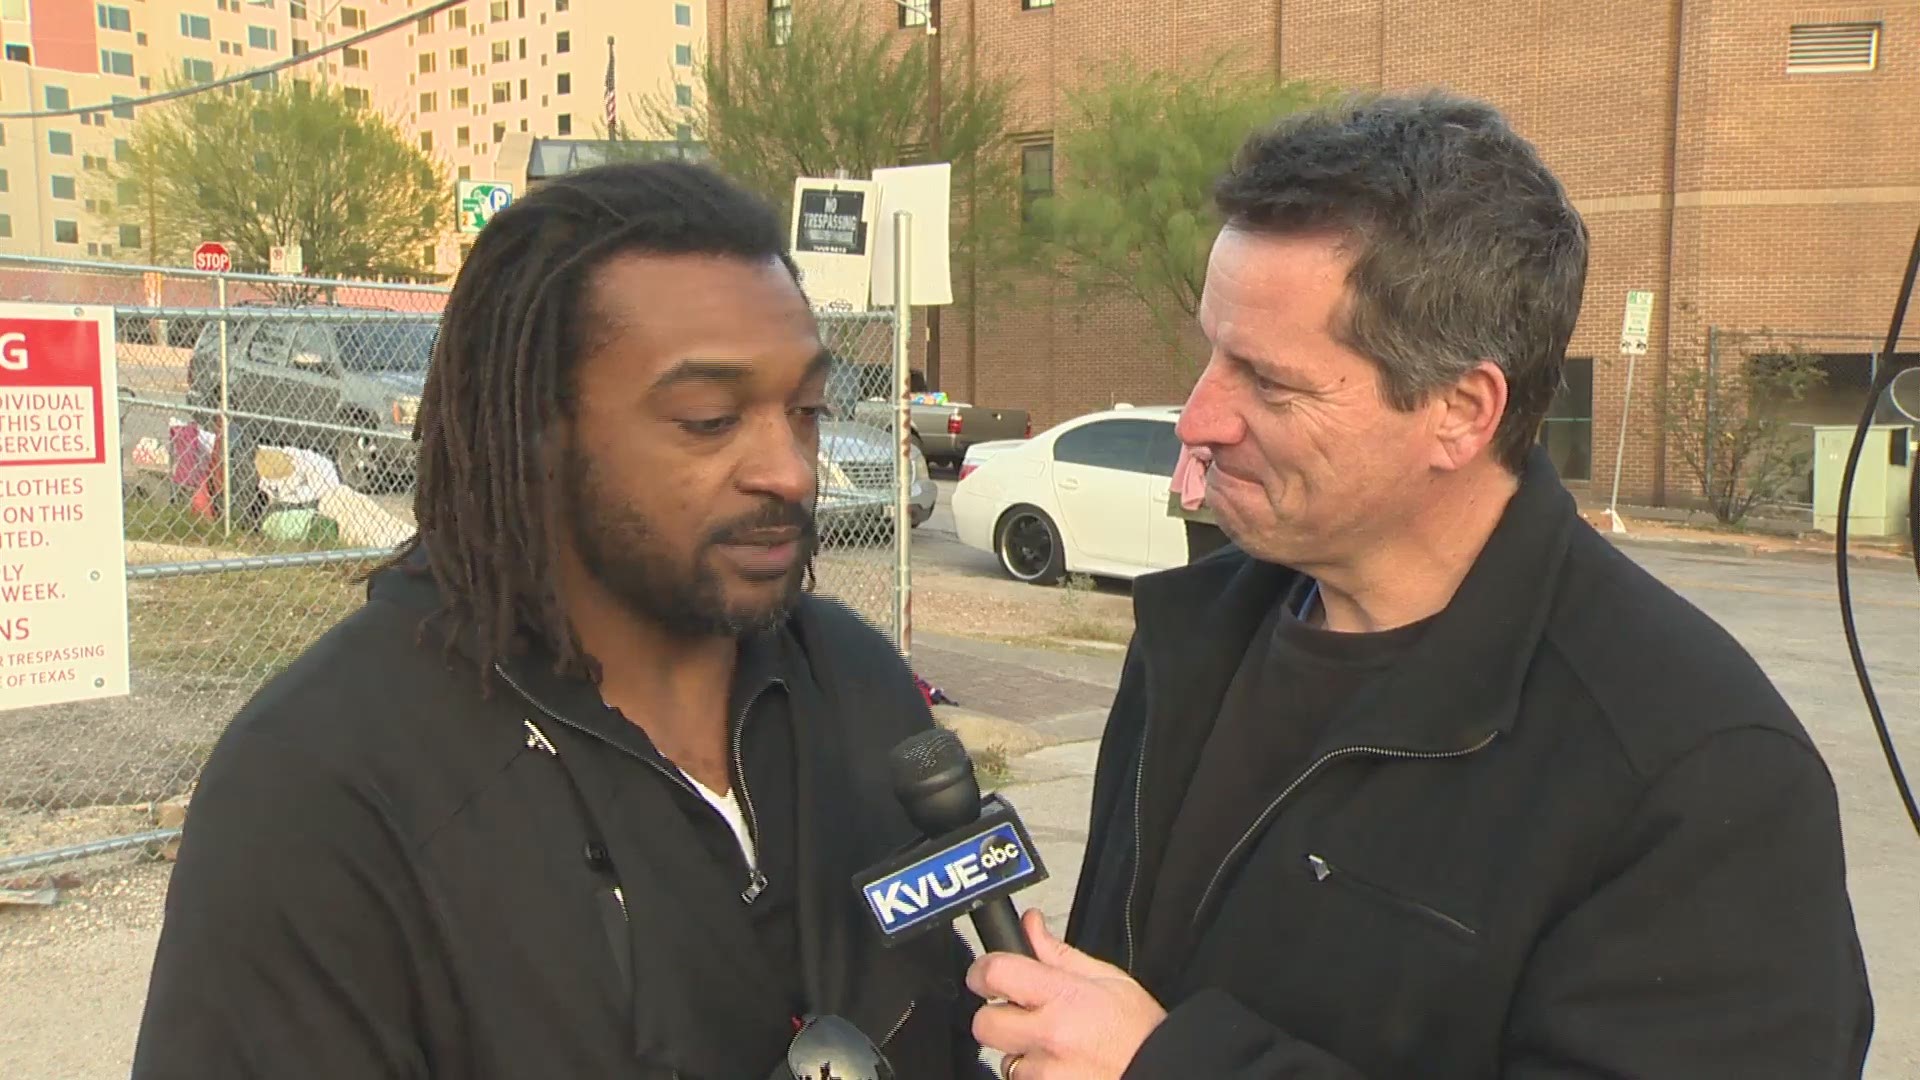 KVUE's Mike Barnes talks with former UT running back Cedric Benson about giving back to Austin and his greatness being overlooked.